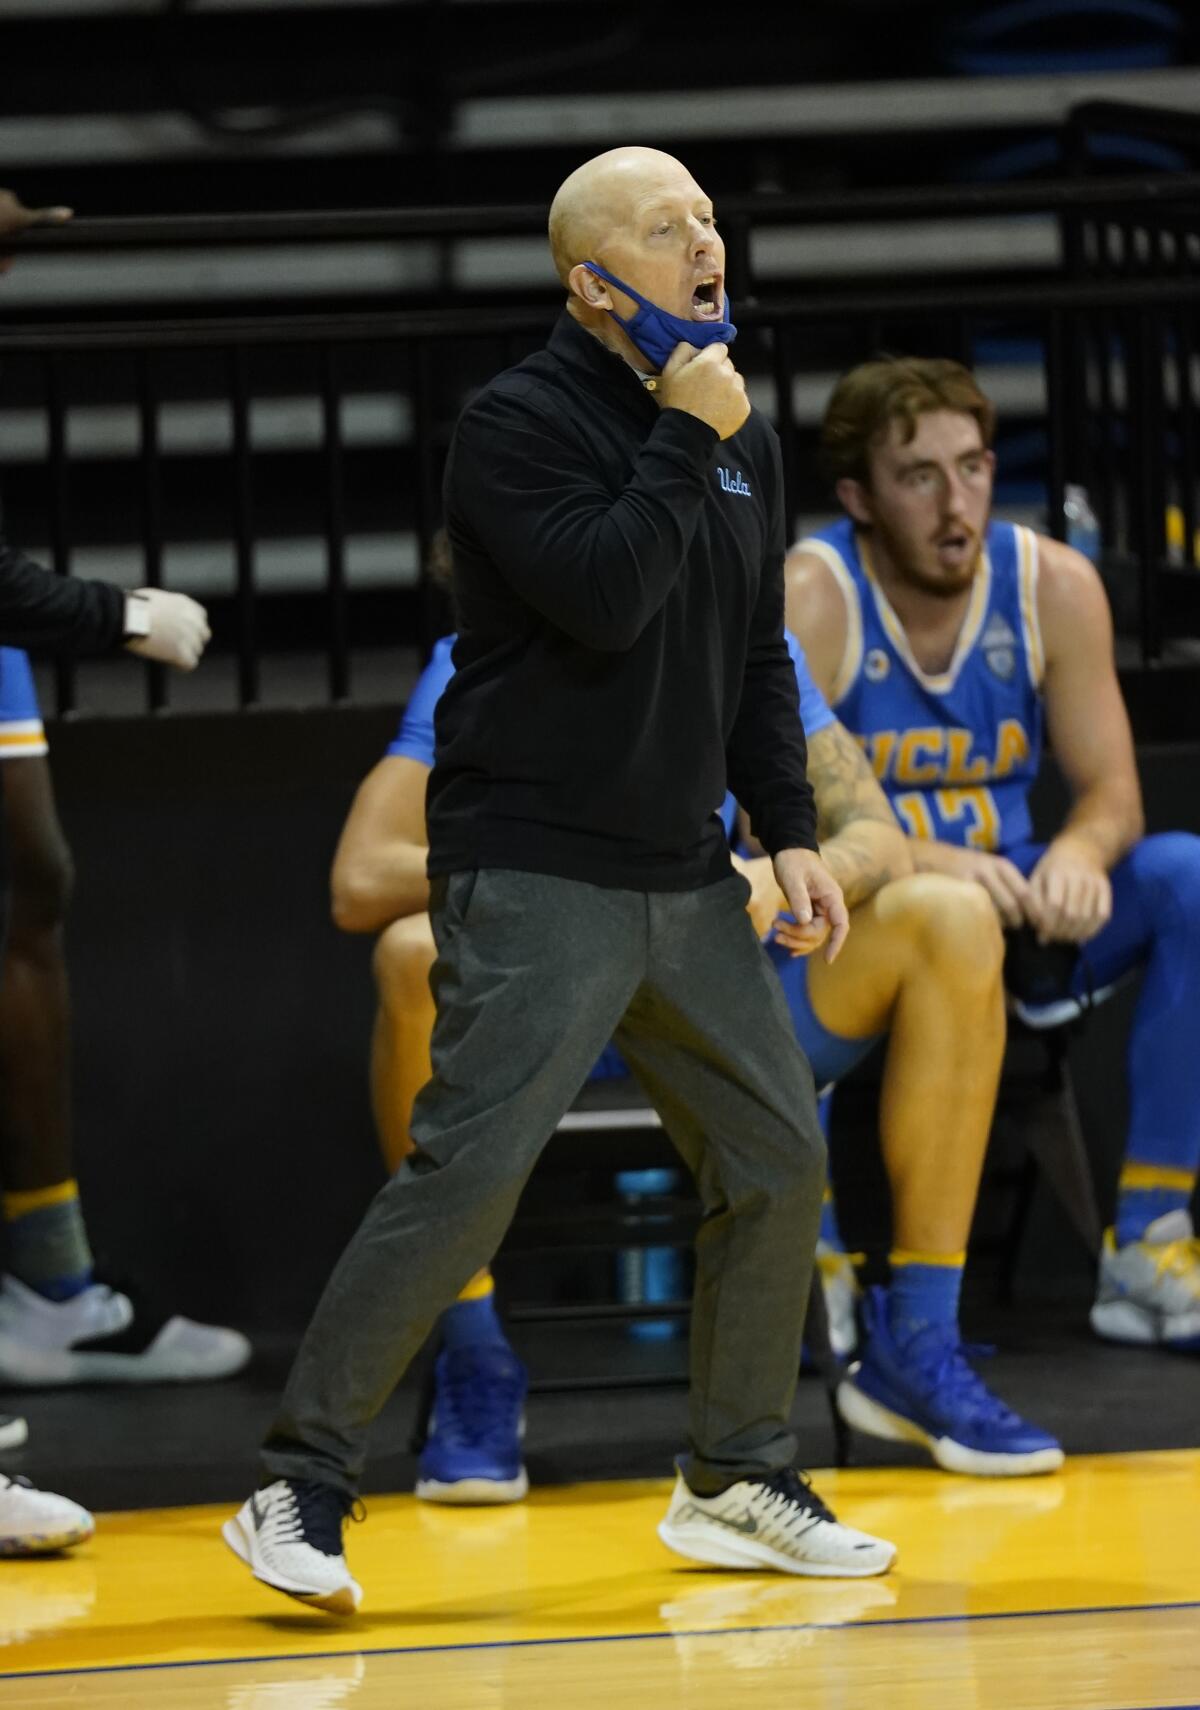 UCLA coach Mick Cronin, on the sideline, pulls down his face mask as he shouts.